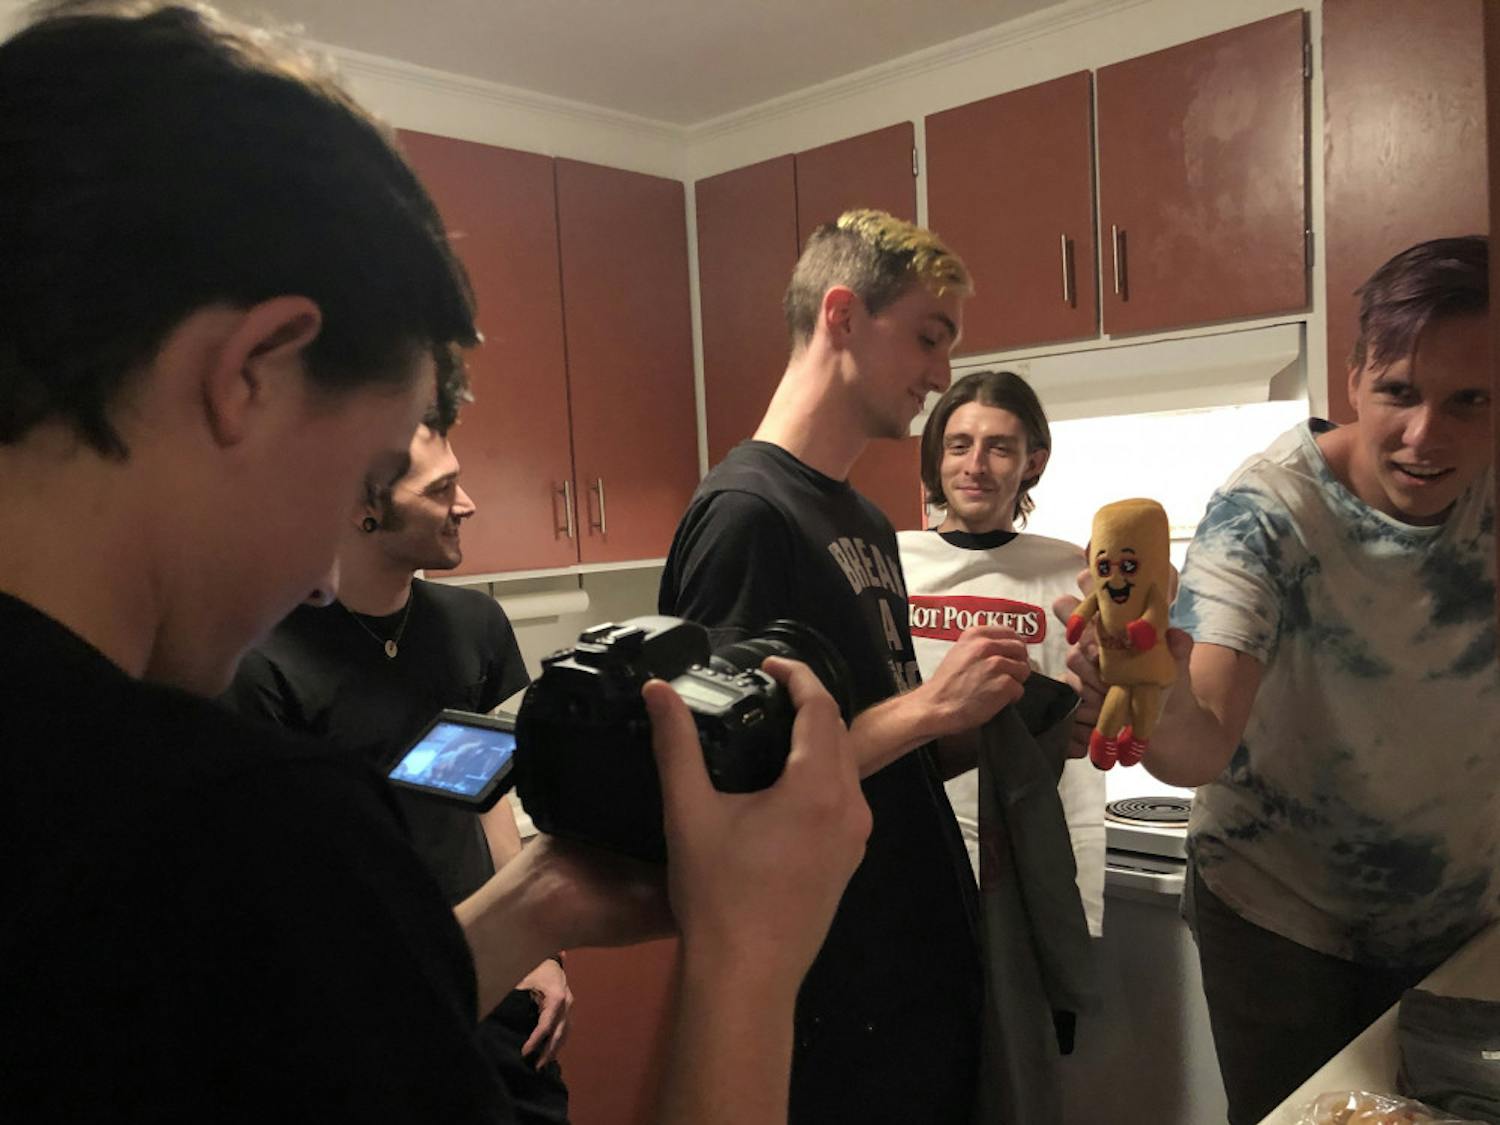 Behind the scenes of Arrows in Action’s Hot Pockets unboxing video. The band’s manager, Jacob McKay, films bassist Tony Farah, guitarist Matt Fowler, lead vocalist Victor Viramontes-Pattison and drummer Jesse Frimmel (from left to right).